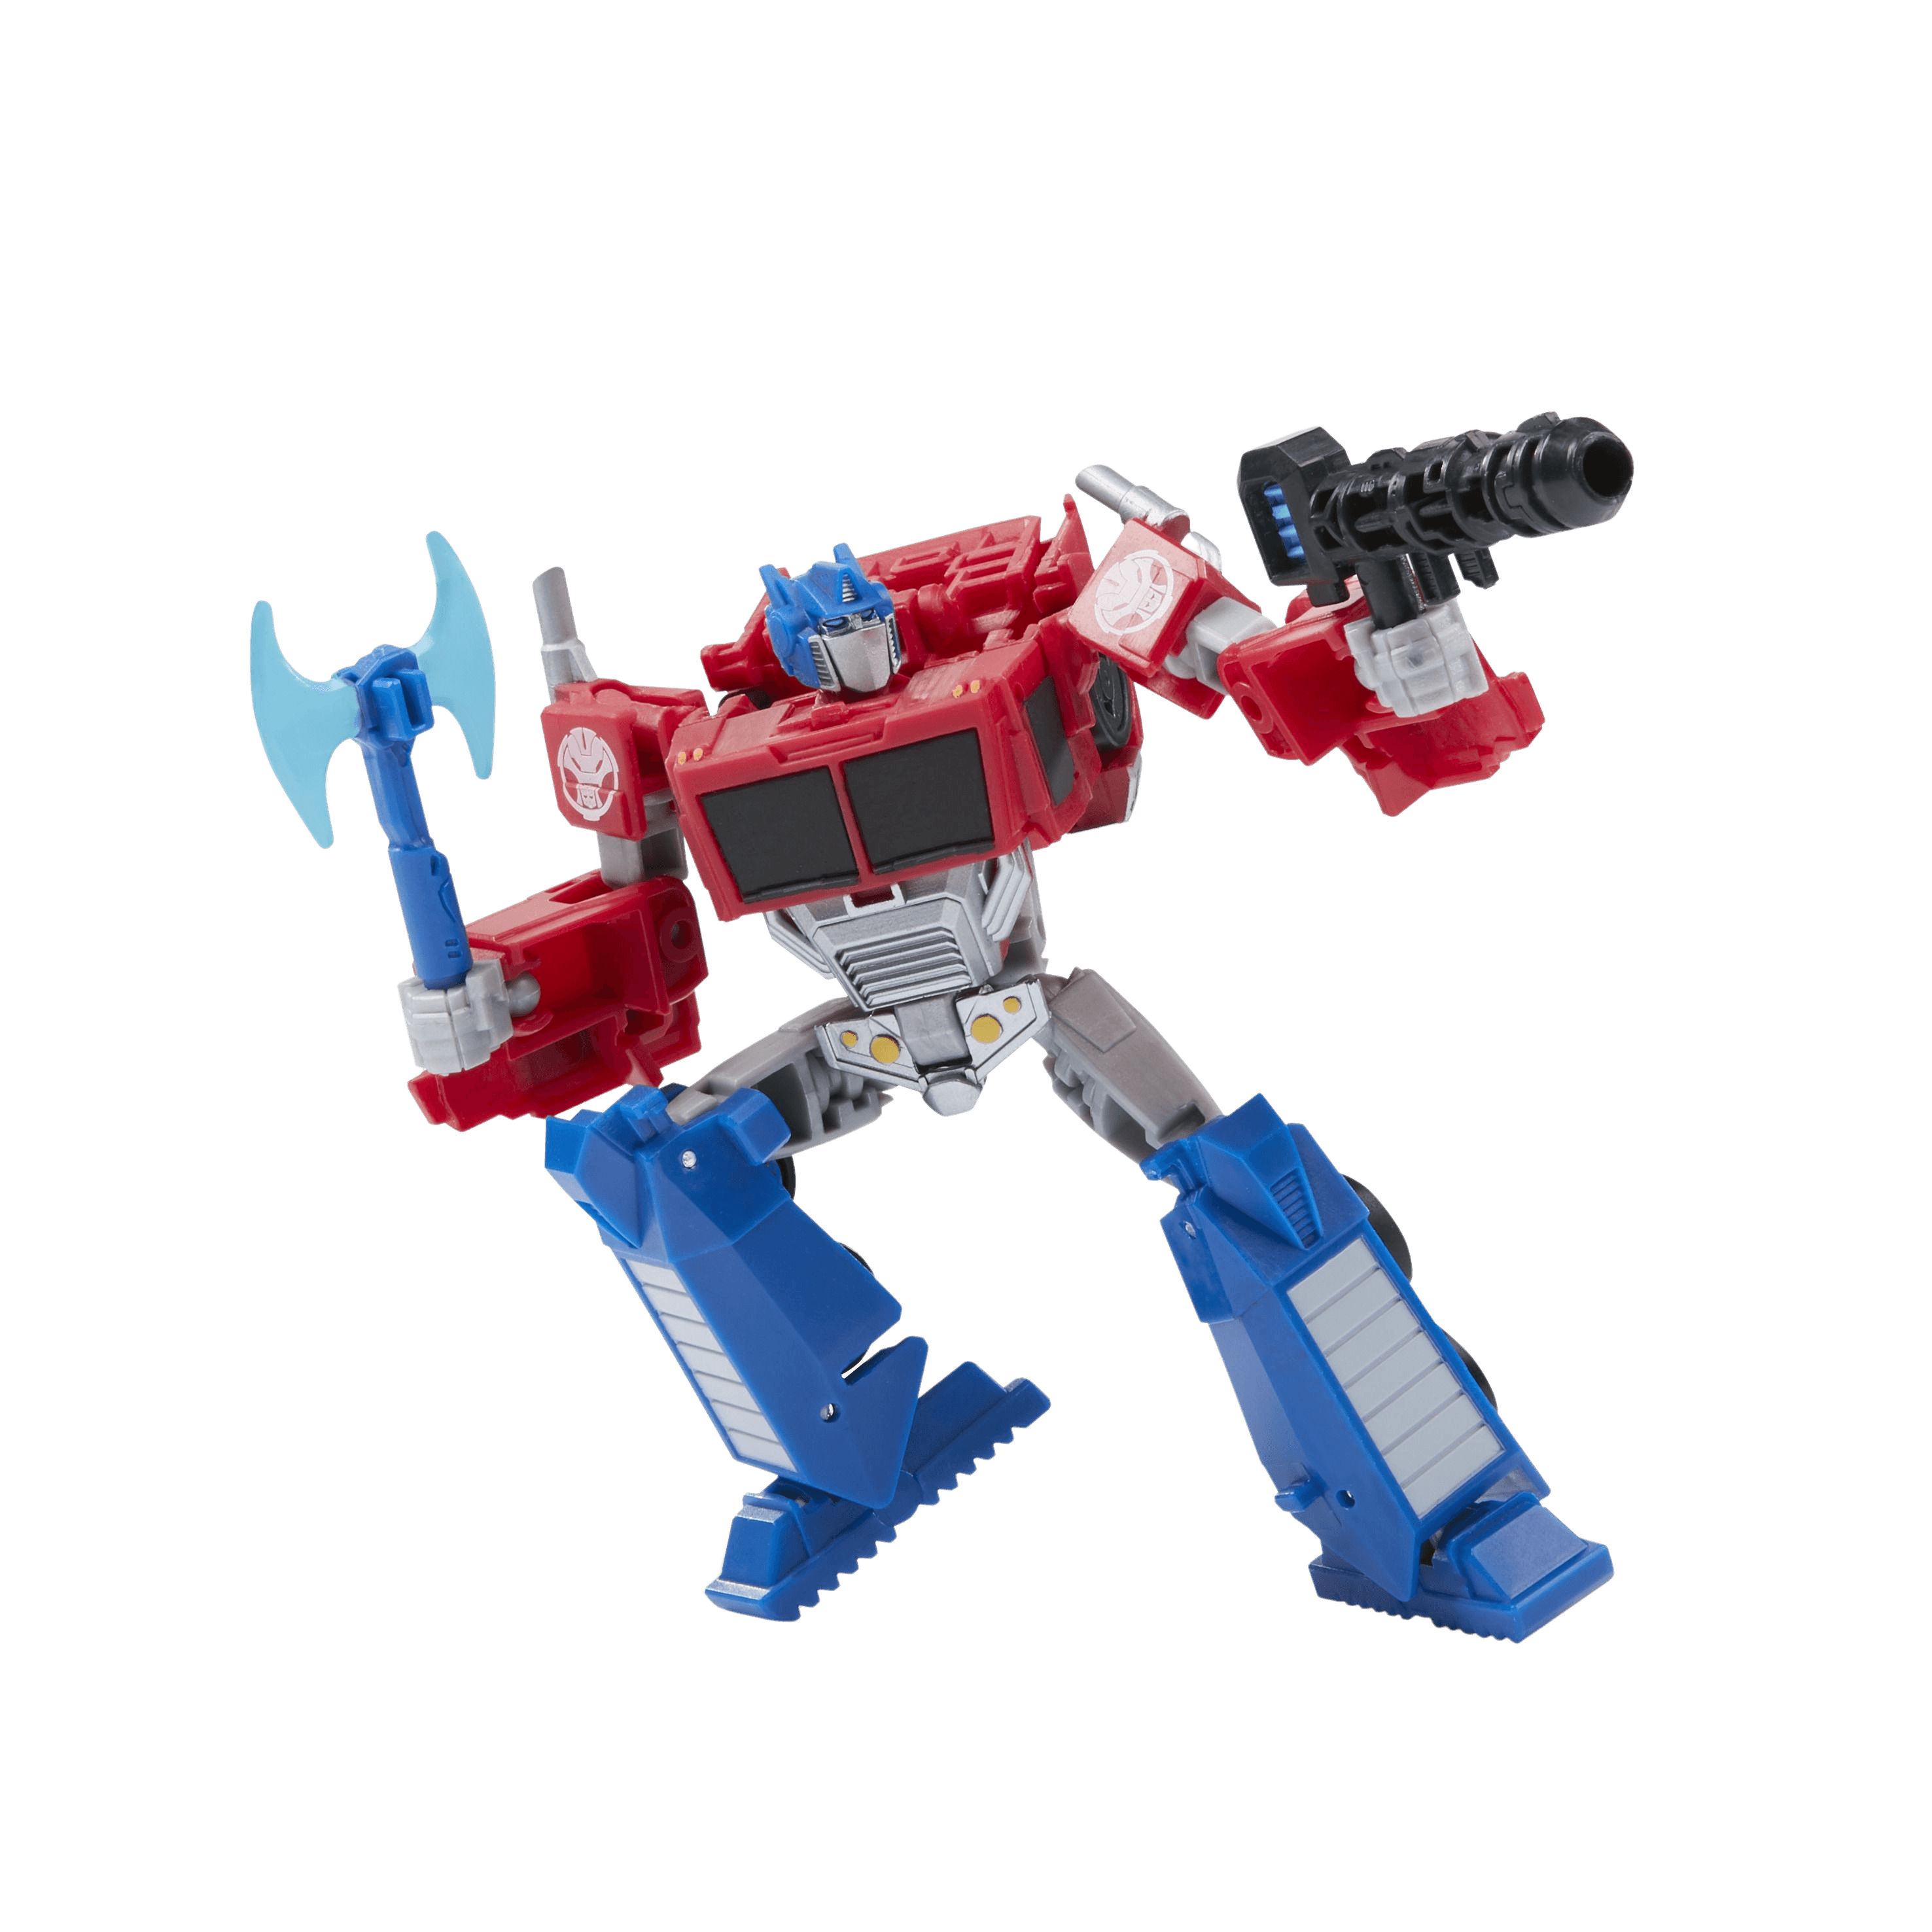 Hasbro - Transformers EarthSpark - Deluxe Optimus Prime Action Figure - The Card Vault